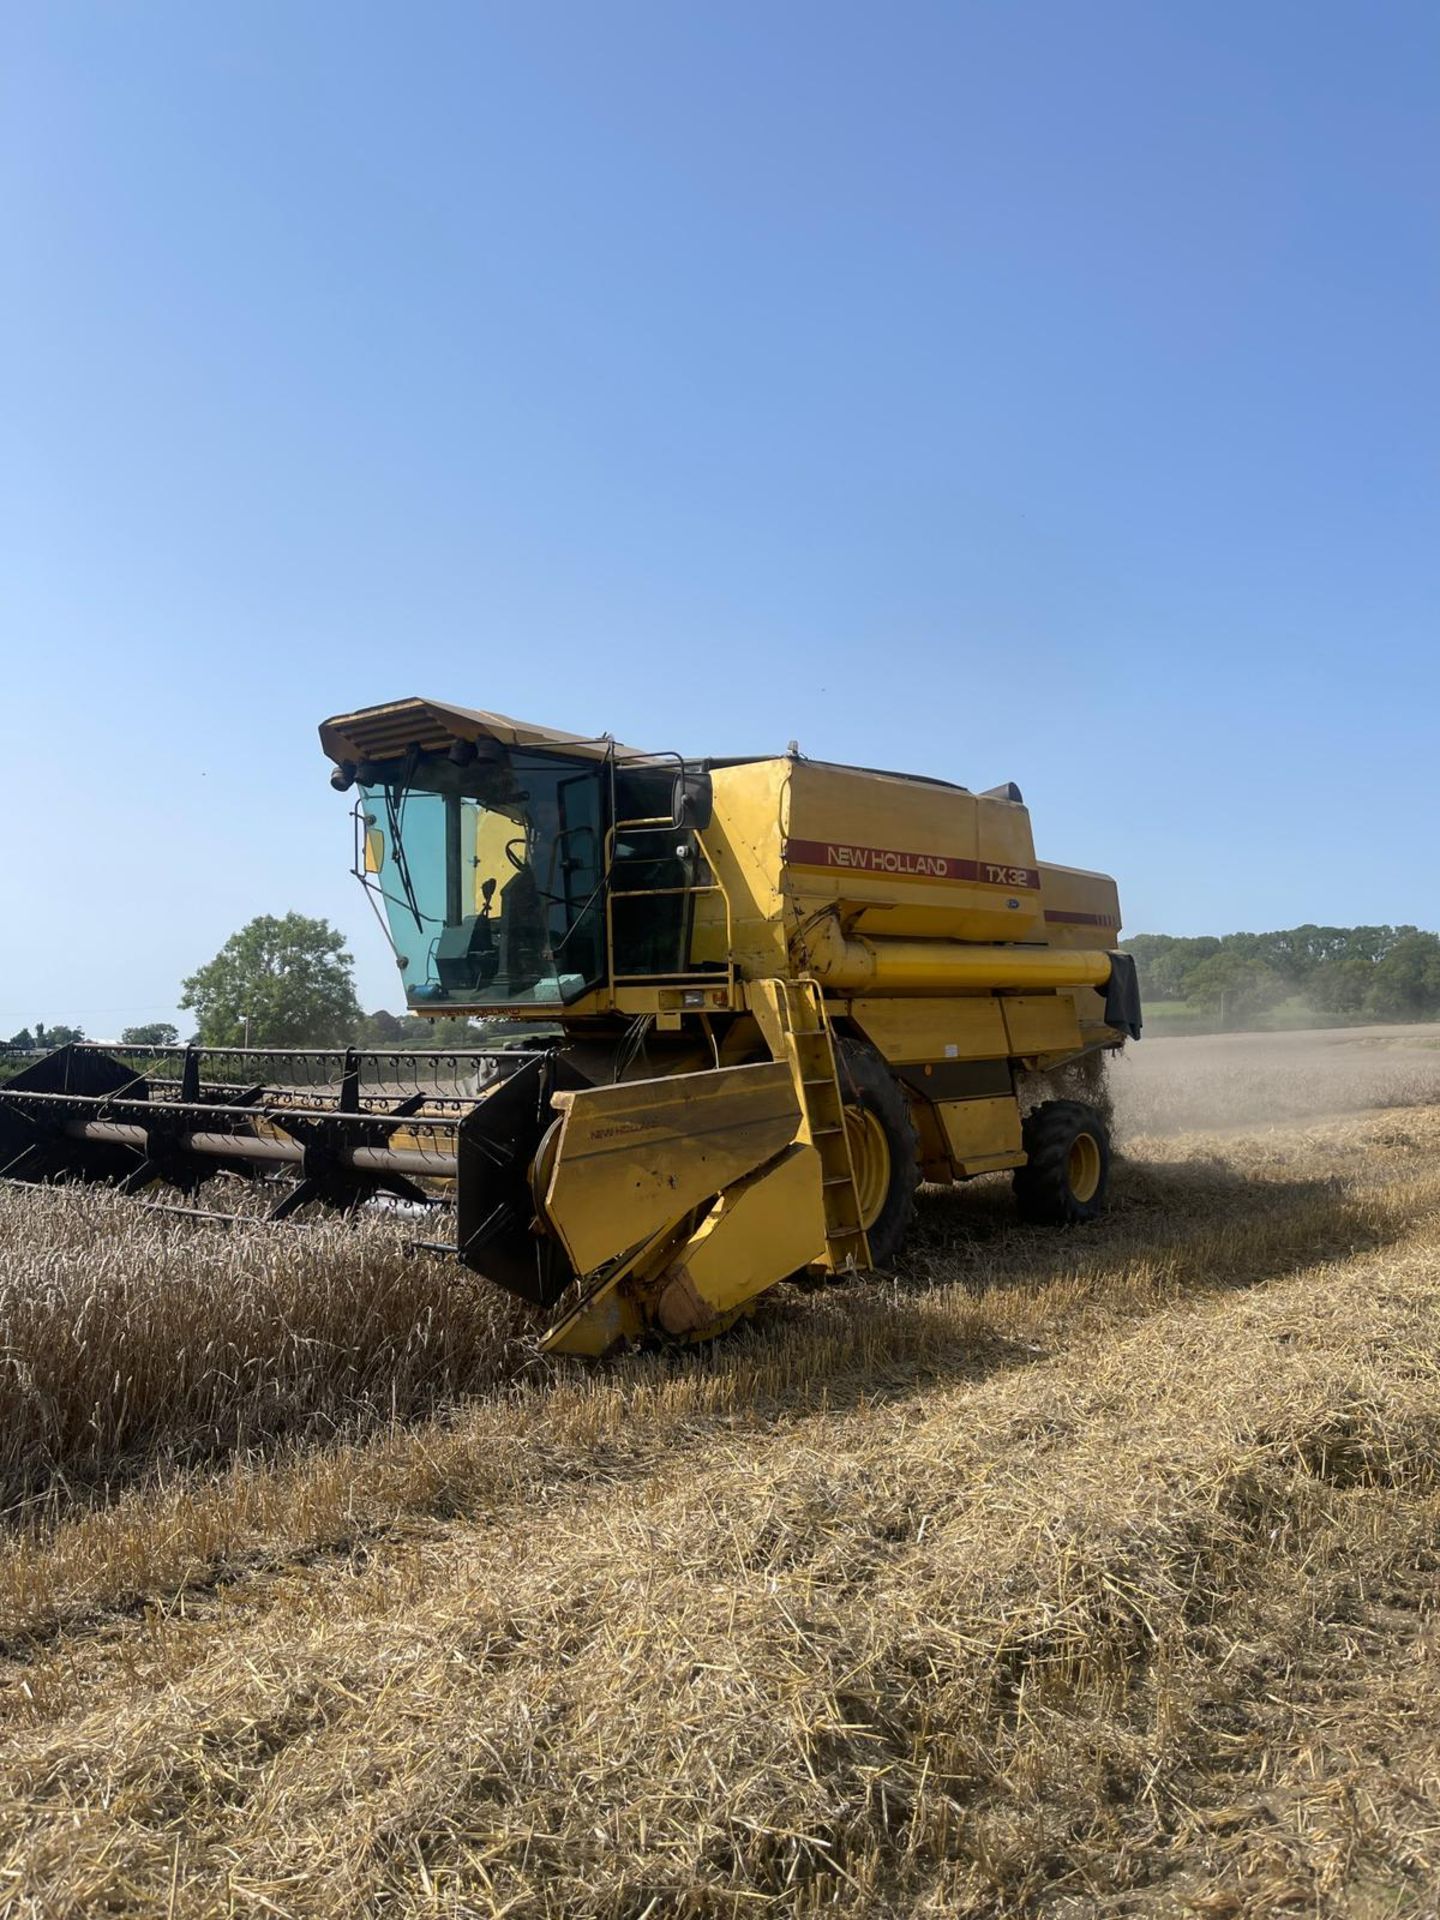 NEW HOLLAND TX32 COMBINE - Image 5 of 19